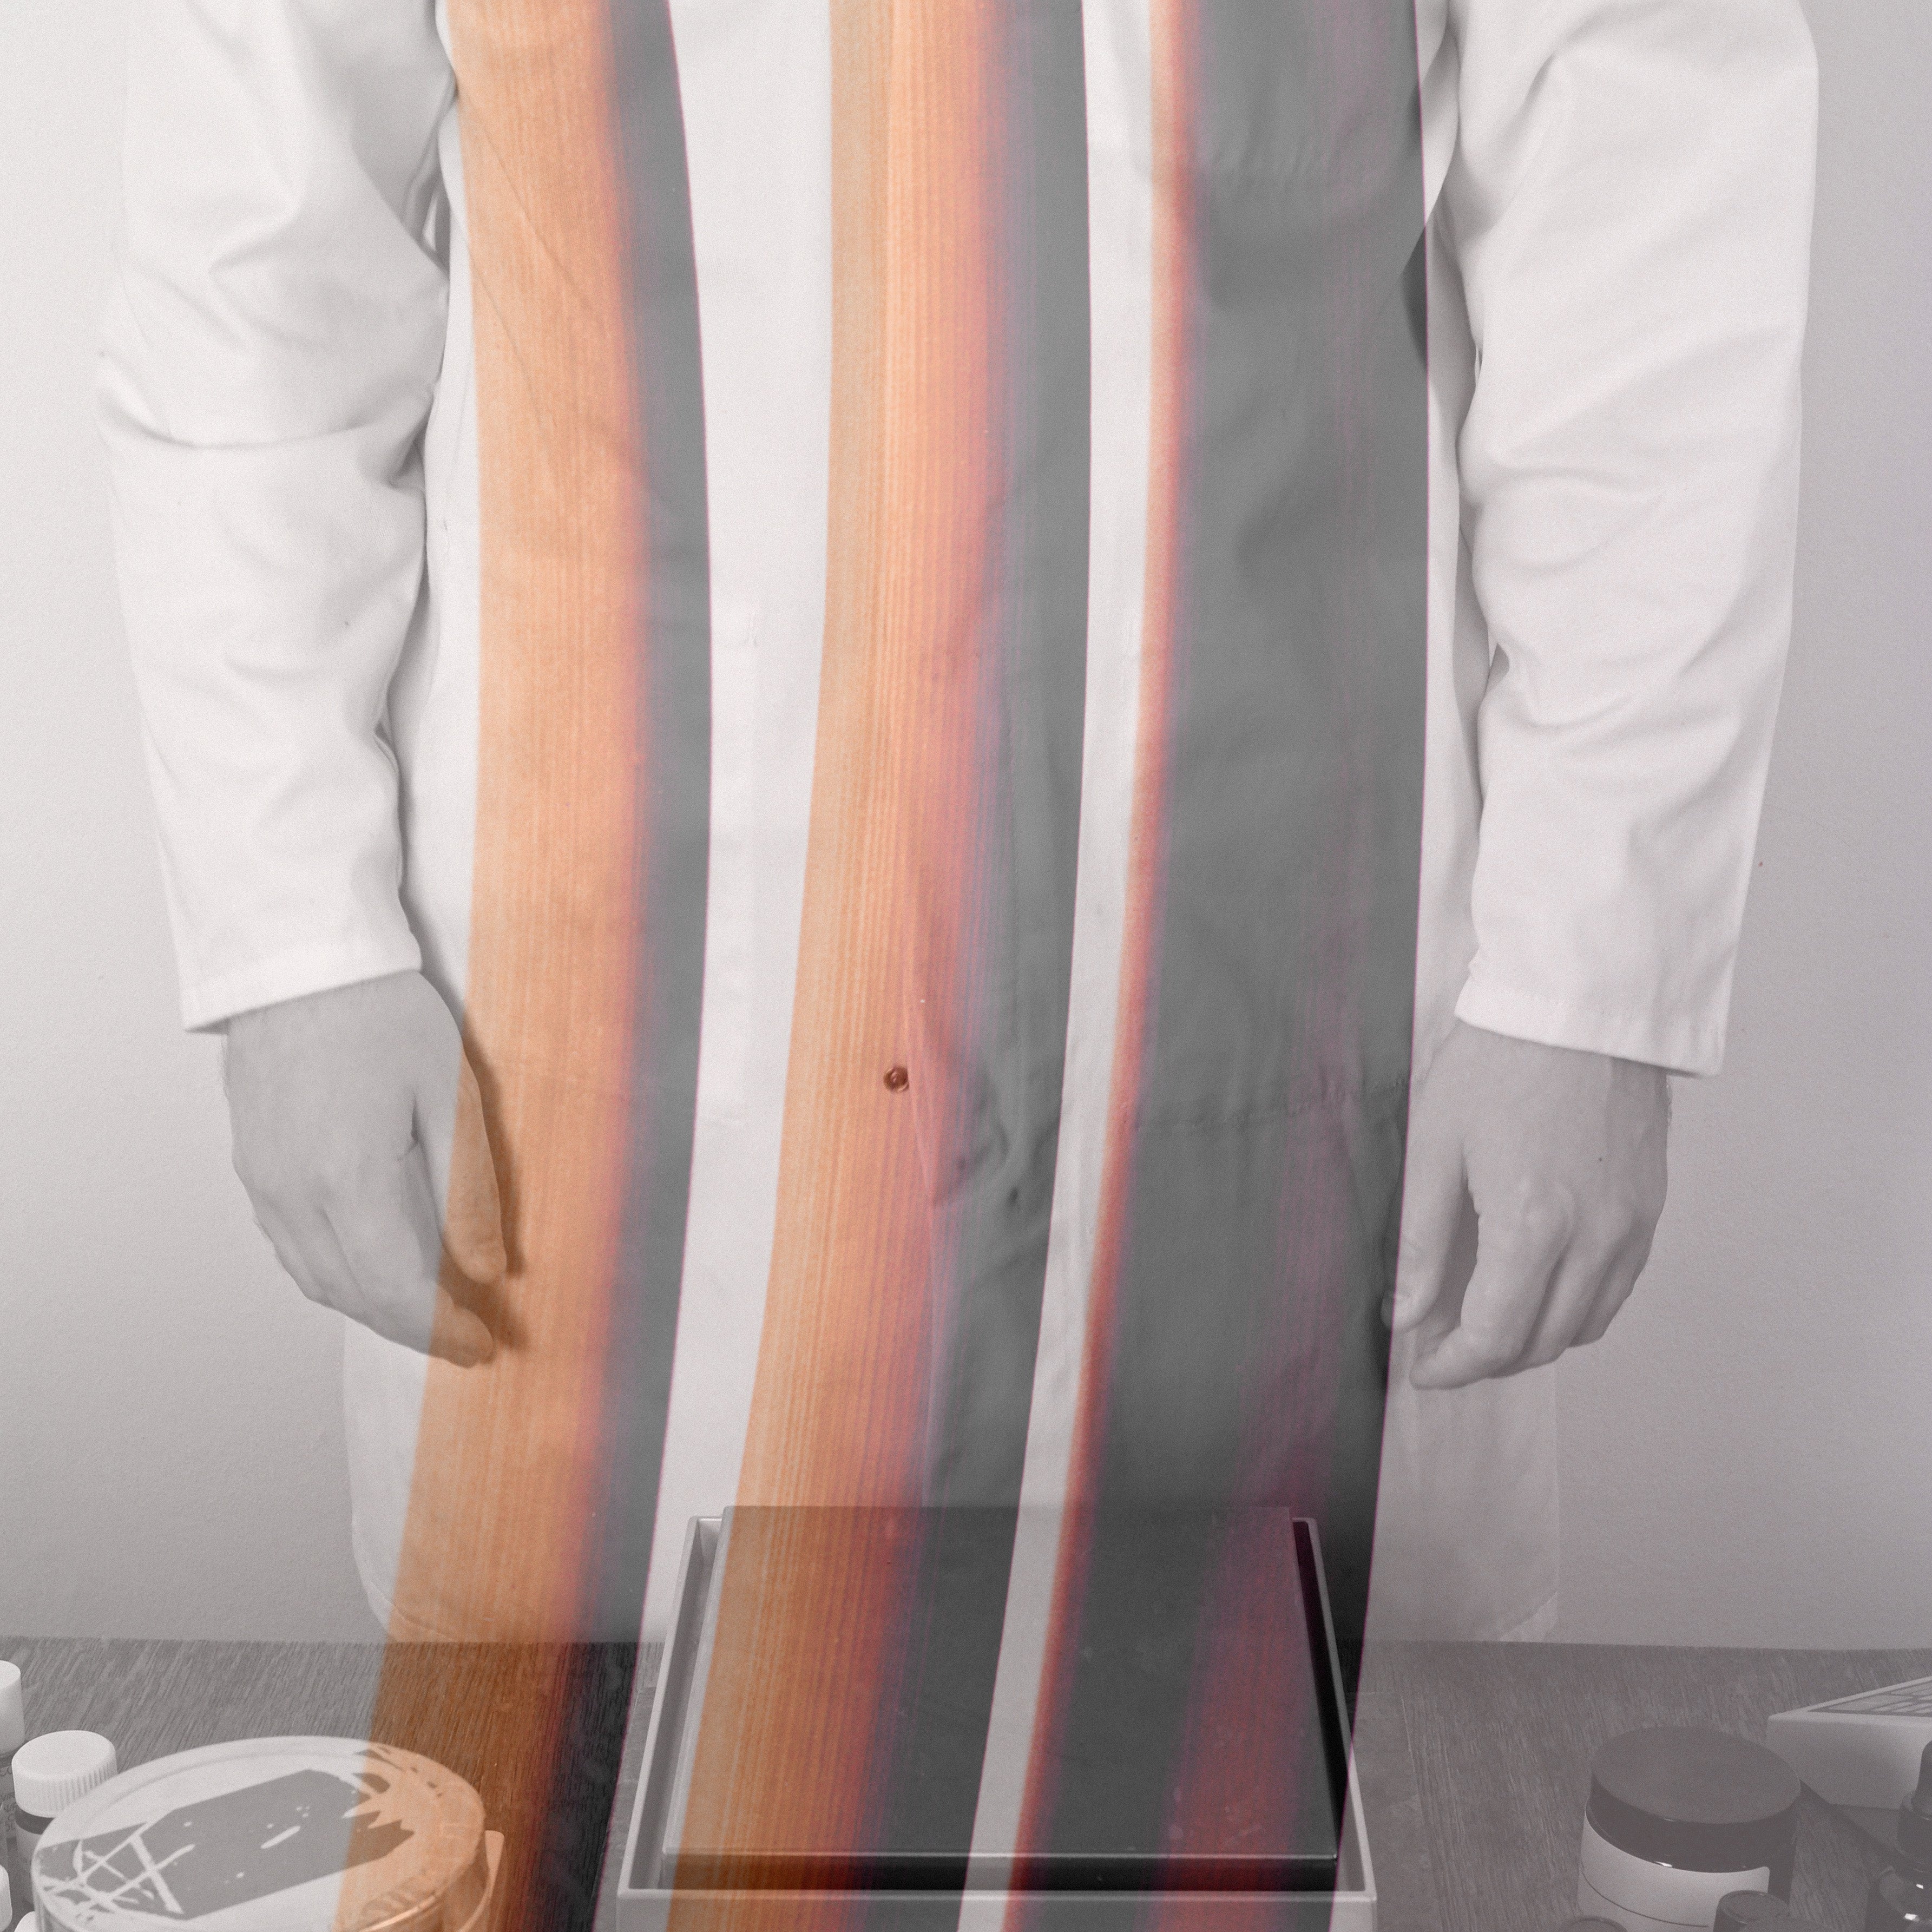 Perfumer in white lab coat overlaid with abstract image of rhubarb stalks